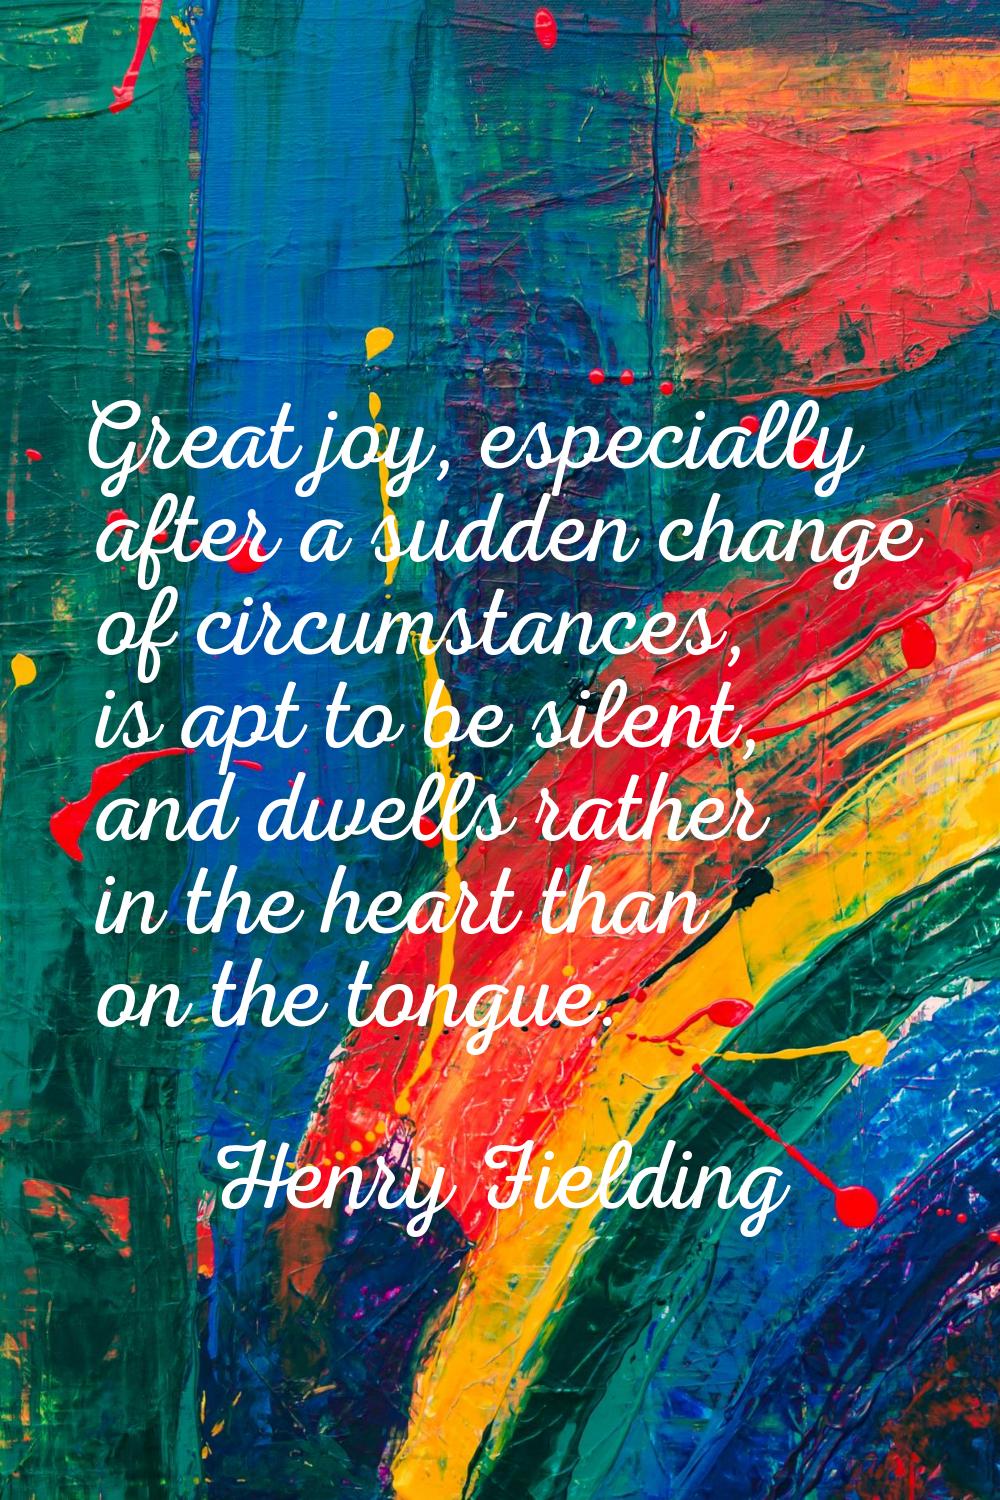 Great joy, especially after a sudden change of circumstances, is apt to be silent, and dwells rathe